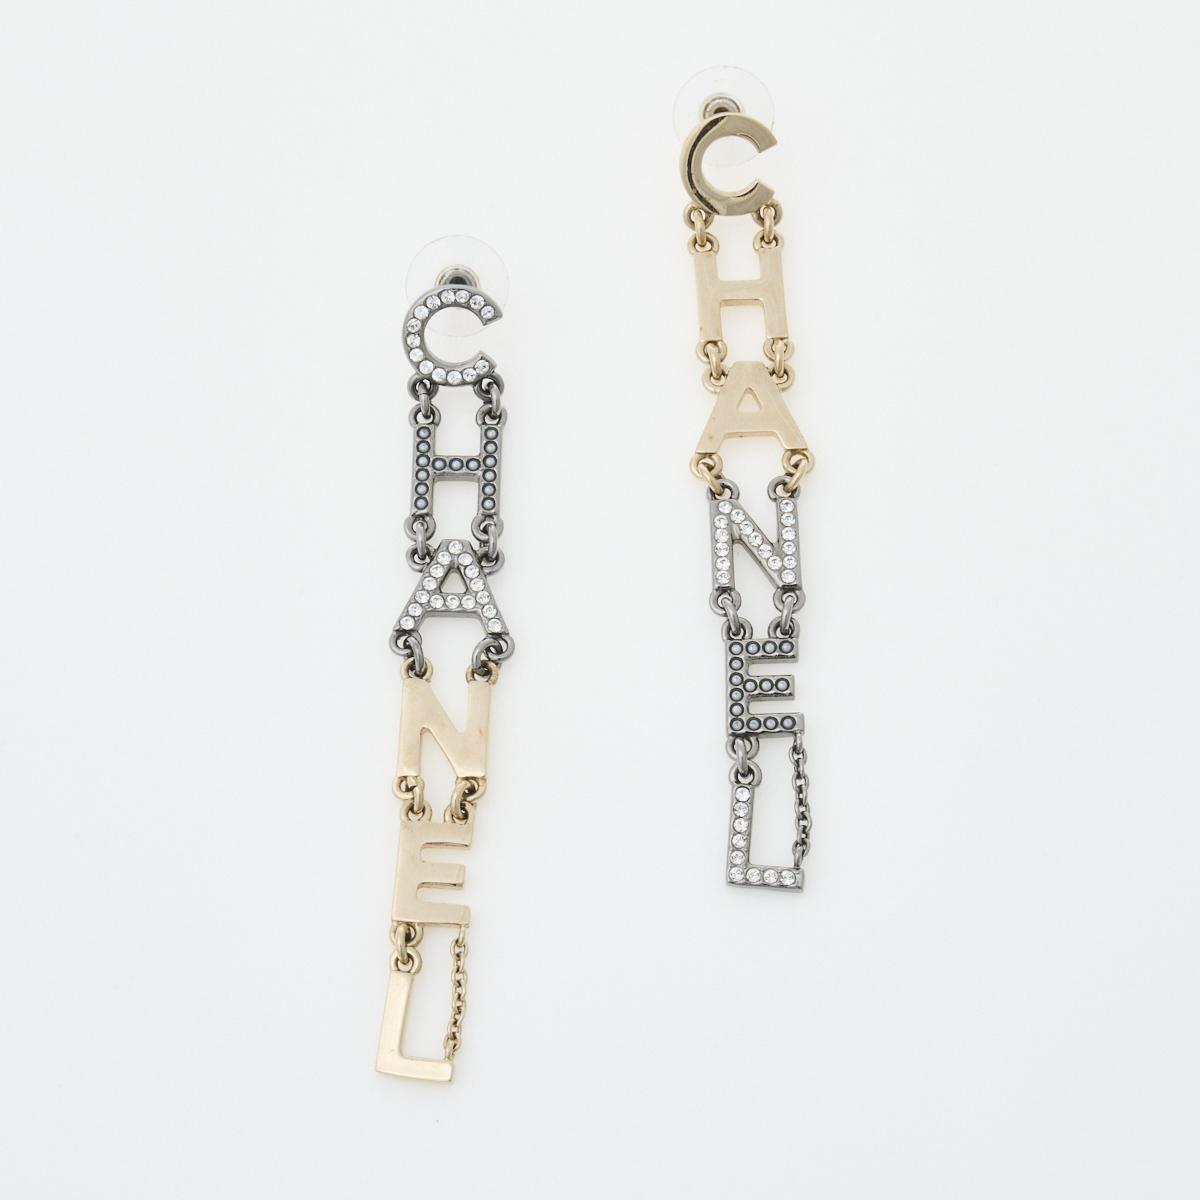 Chanel Earrings for Sale: Online Auctions